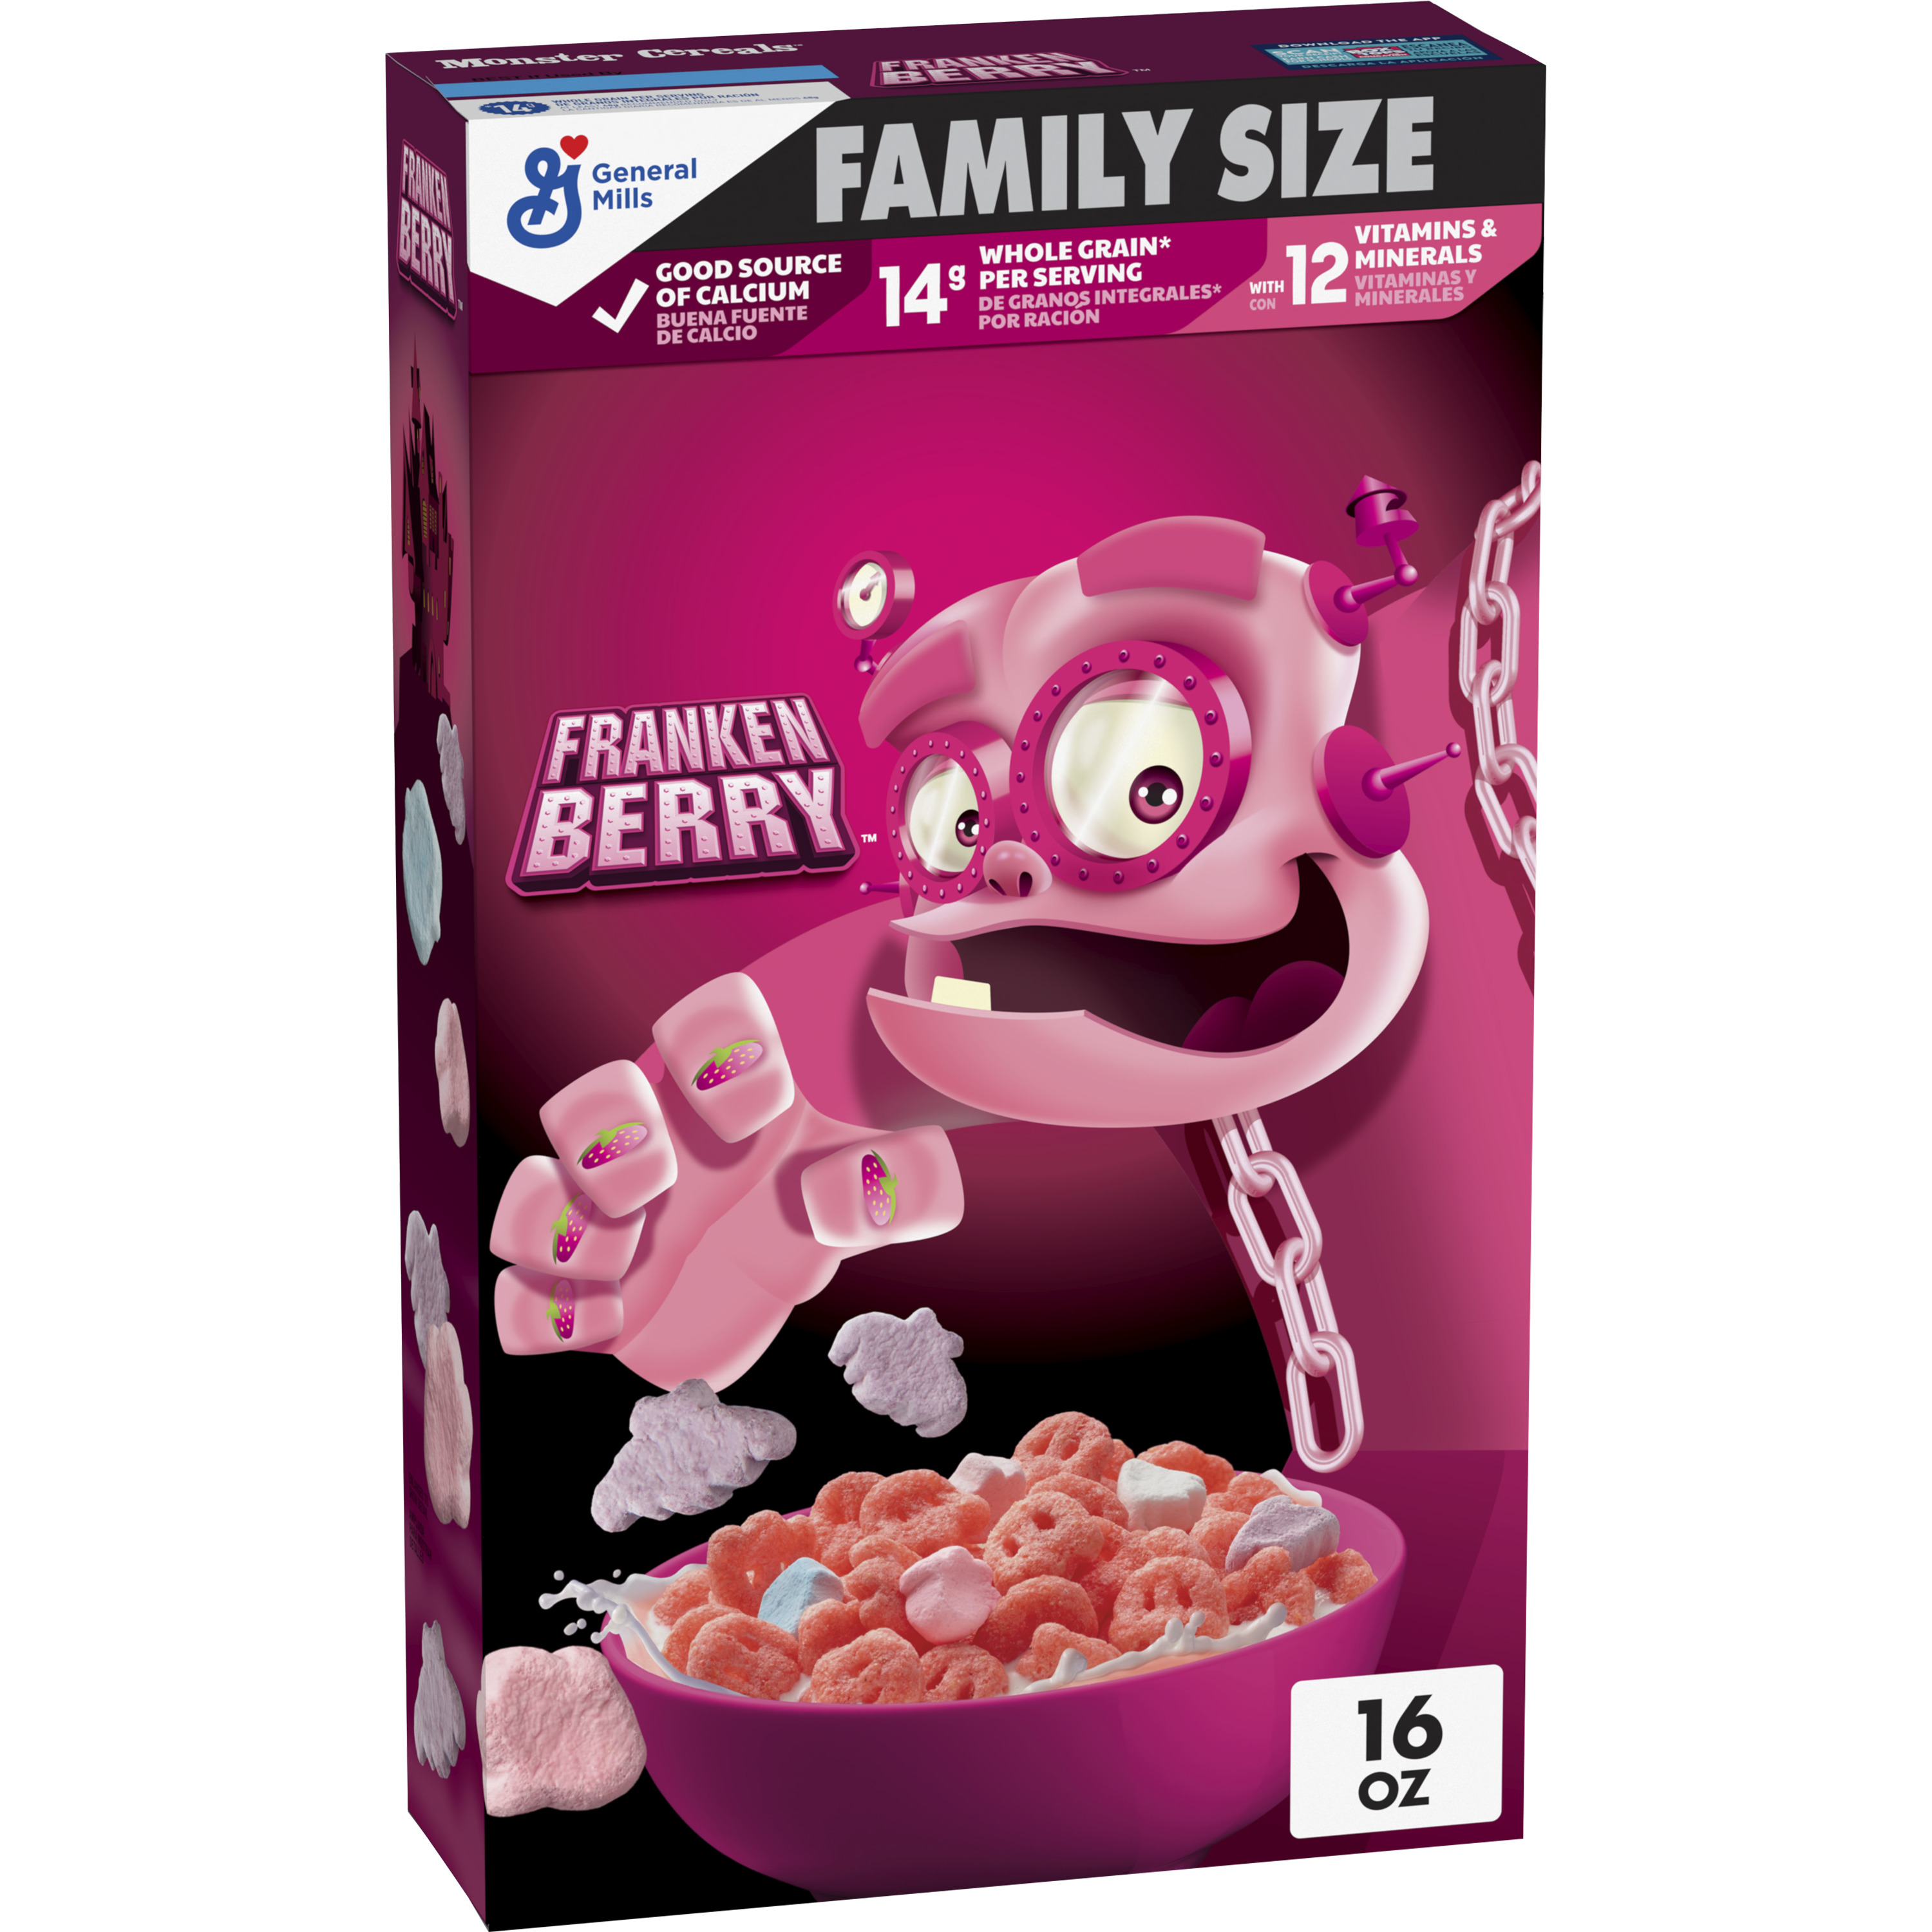 Franken Berry Cereal with Monster Marshmallows, Limited Edition, Family Size, 16 oz - image 1 of 10